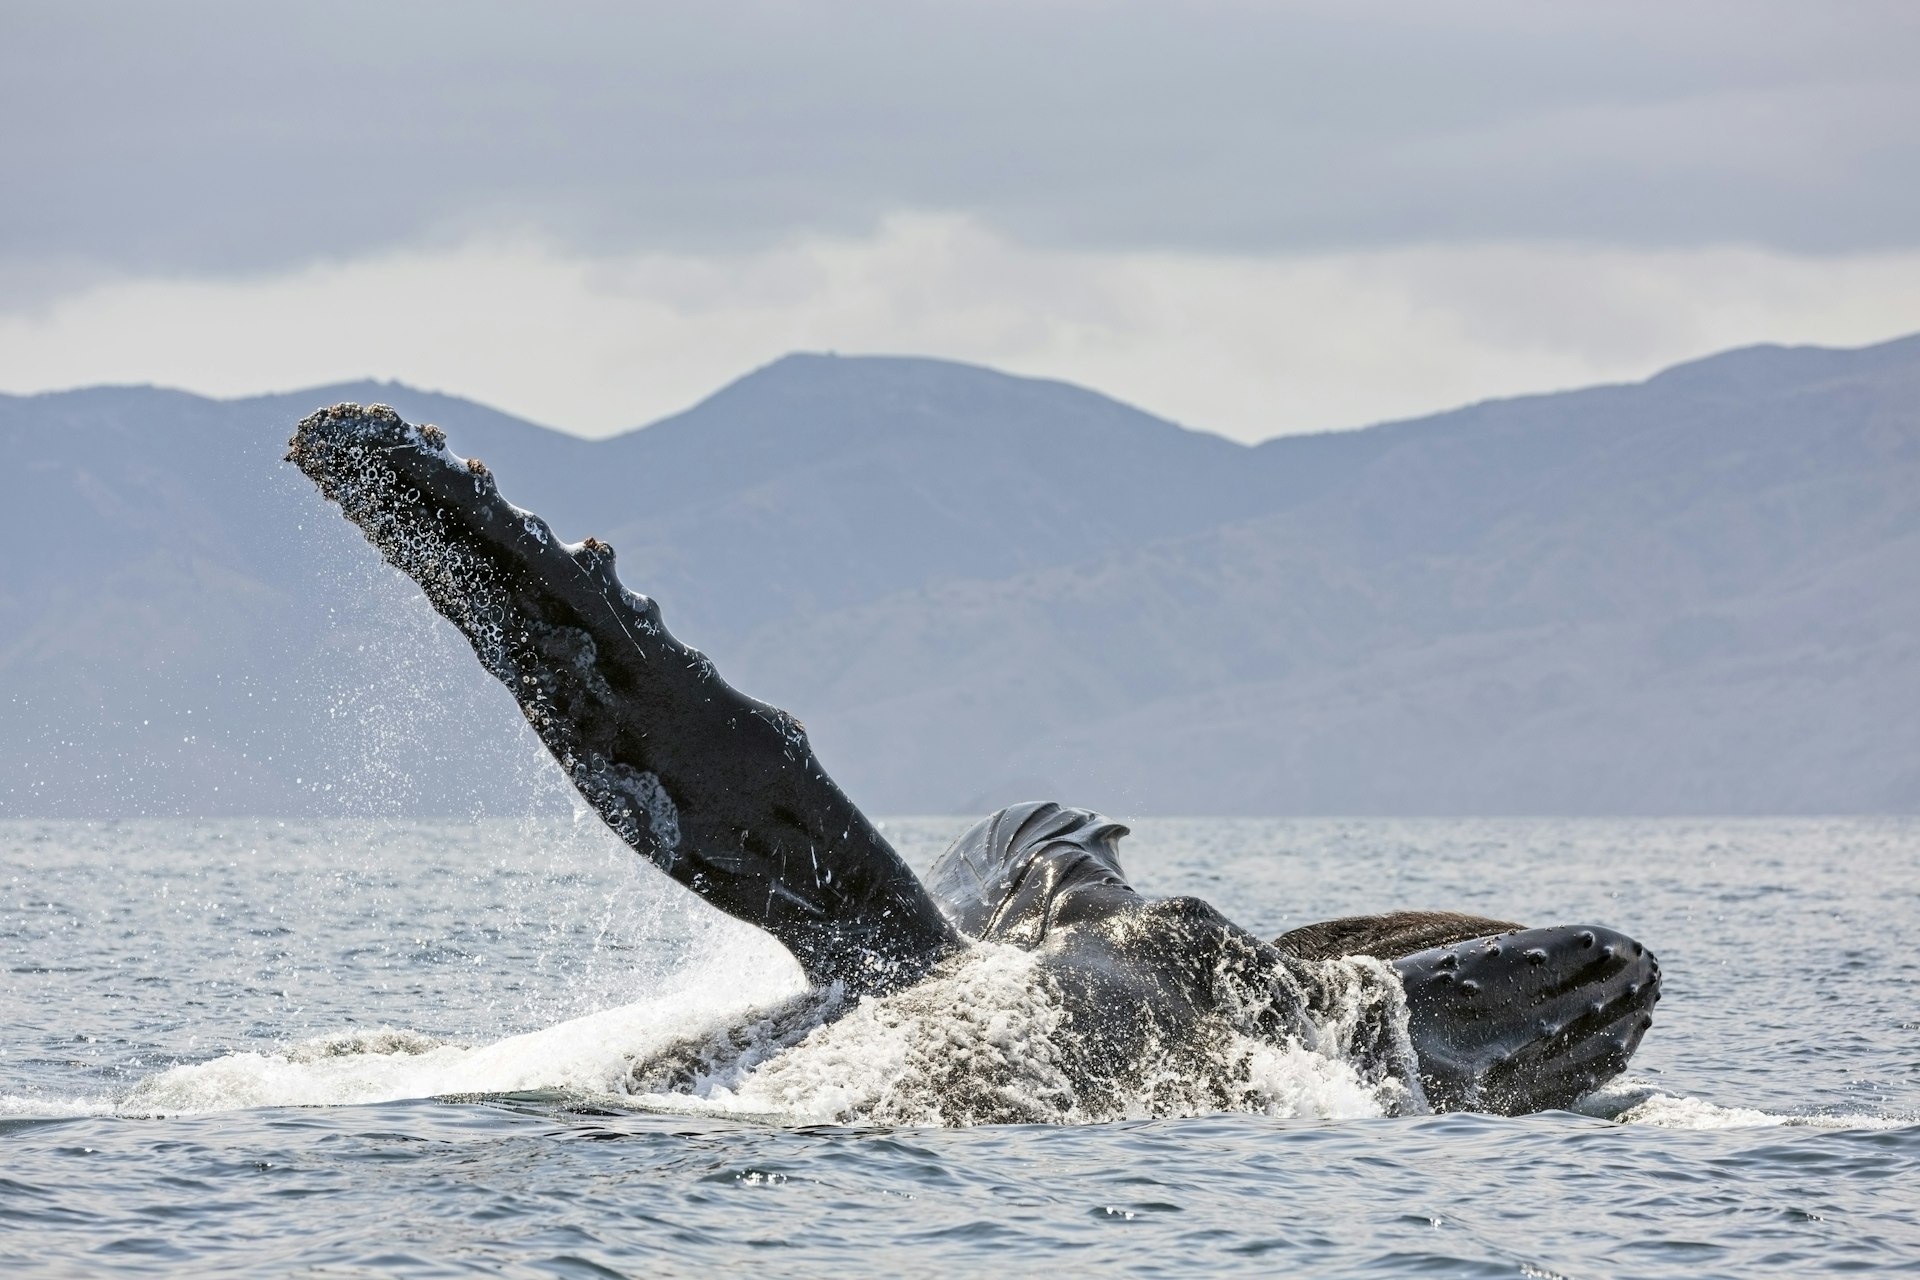 Humpback Whale in the Channel Islands National Park, California